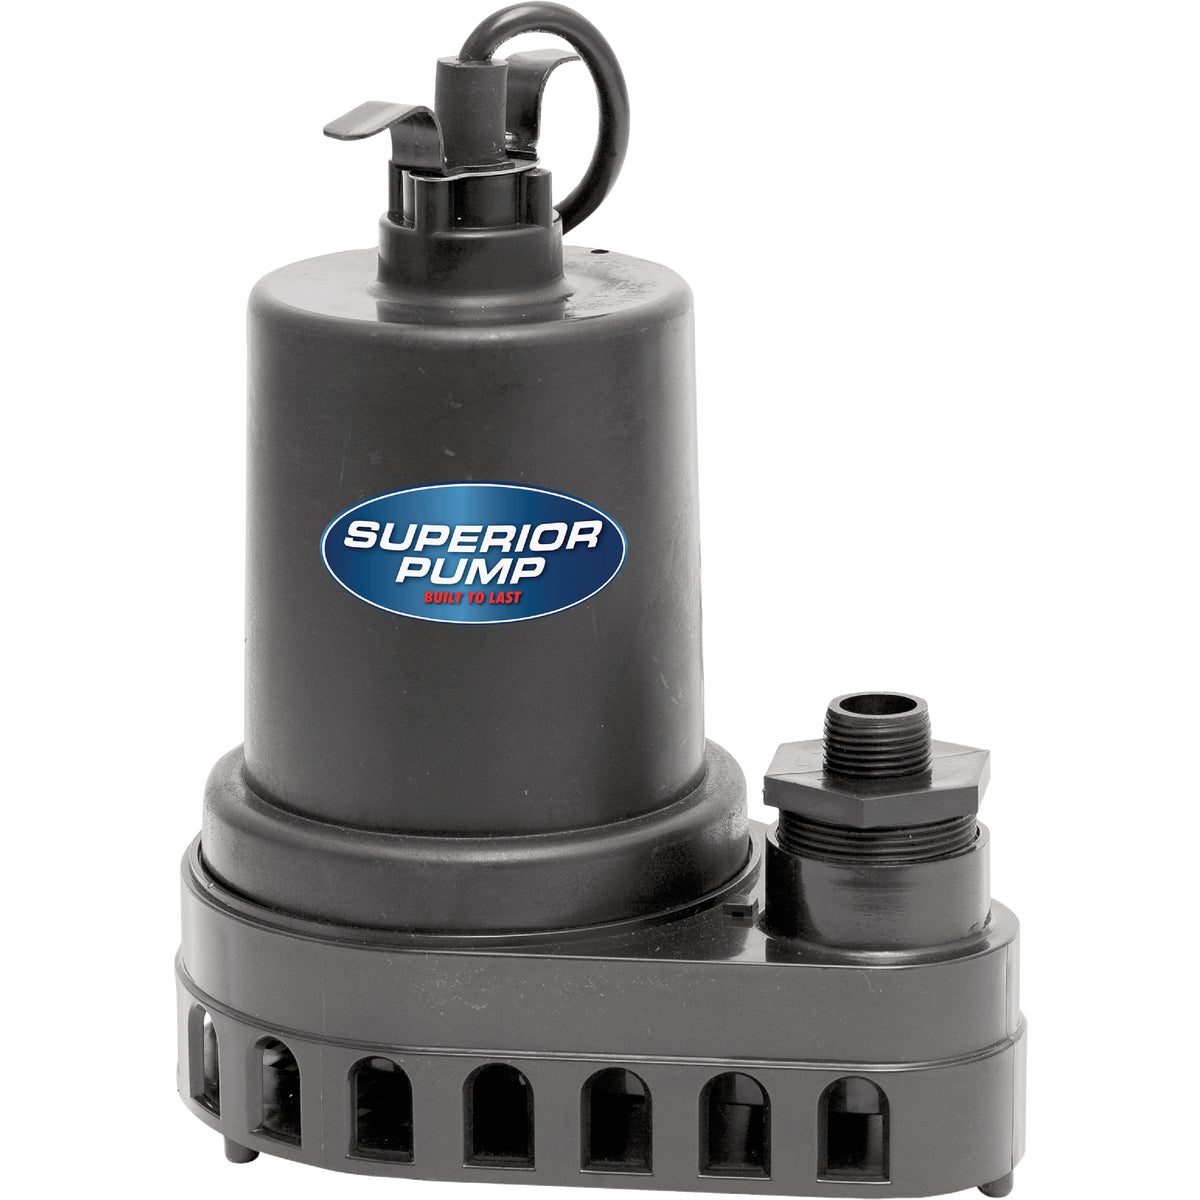 Superior Pump 1/2 HP 3300 GPH Thermoplastic Submersible Utility Pump